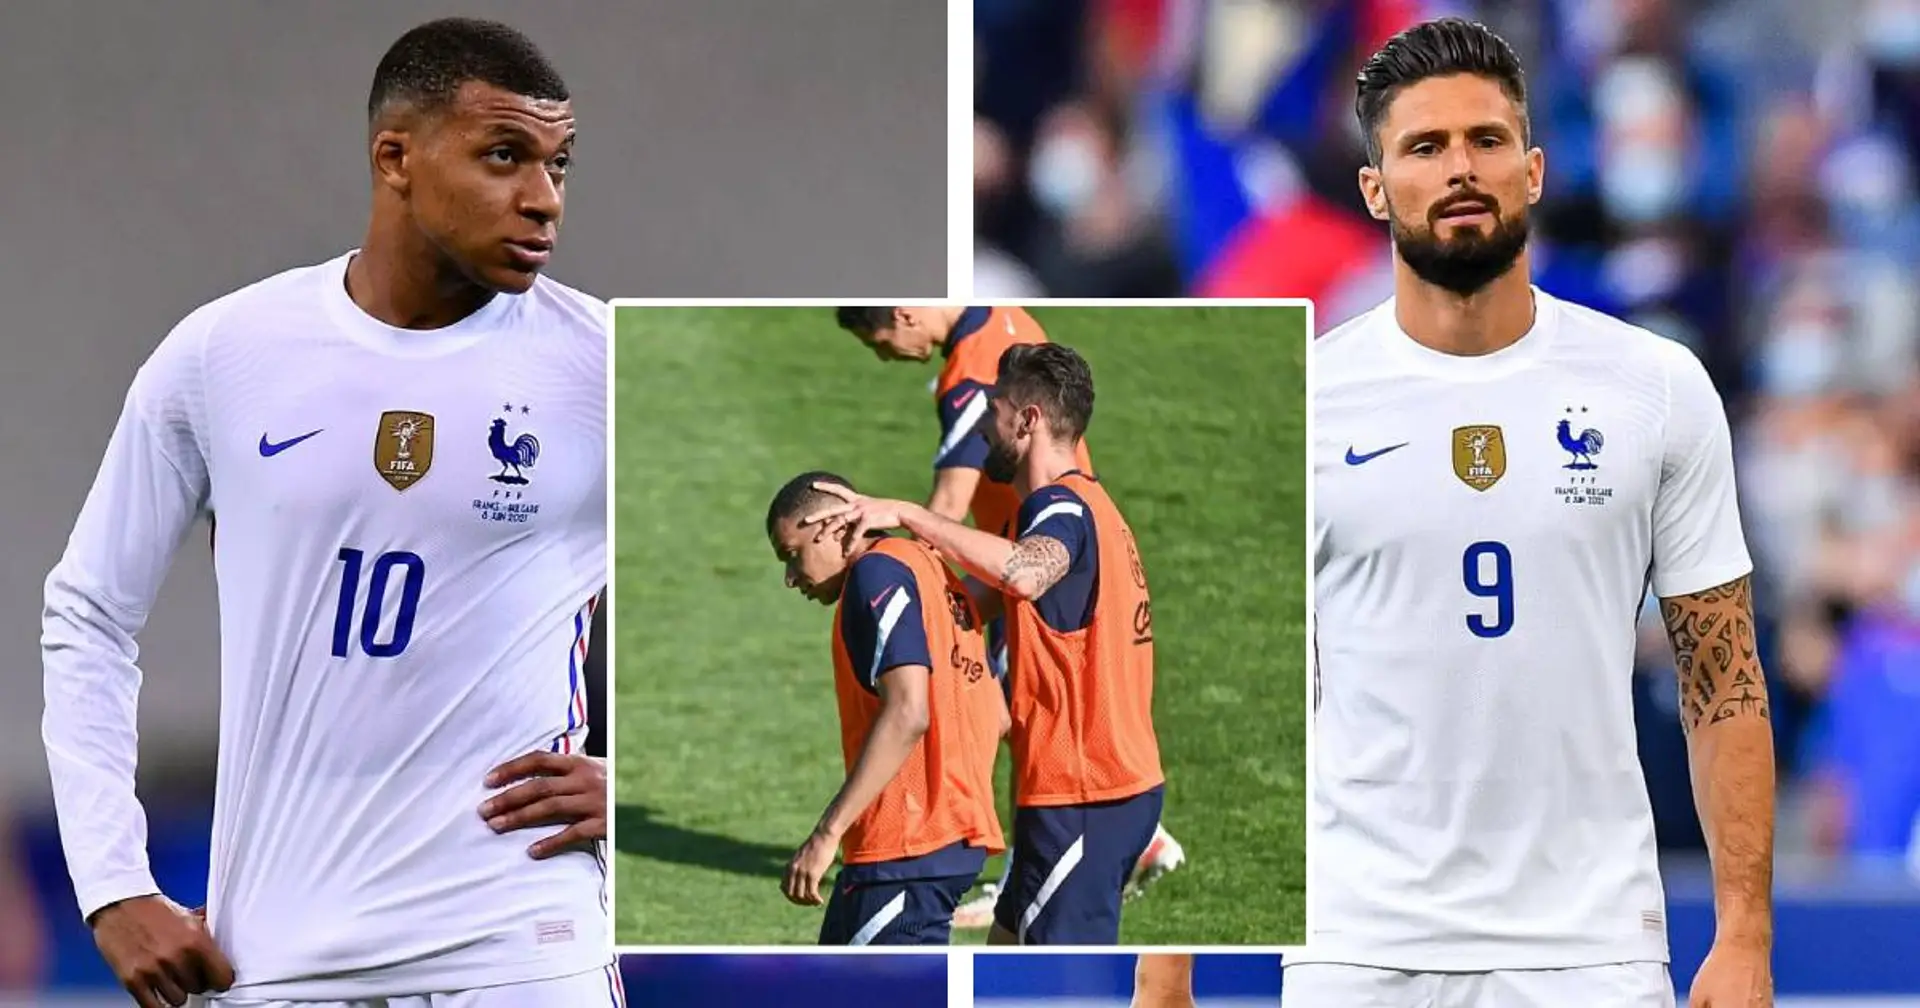 Tension still boiling between Giroud and Mbappe over Olivier's recent comments